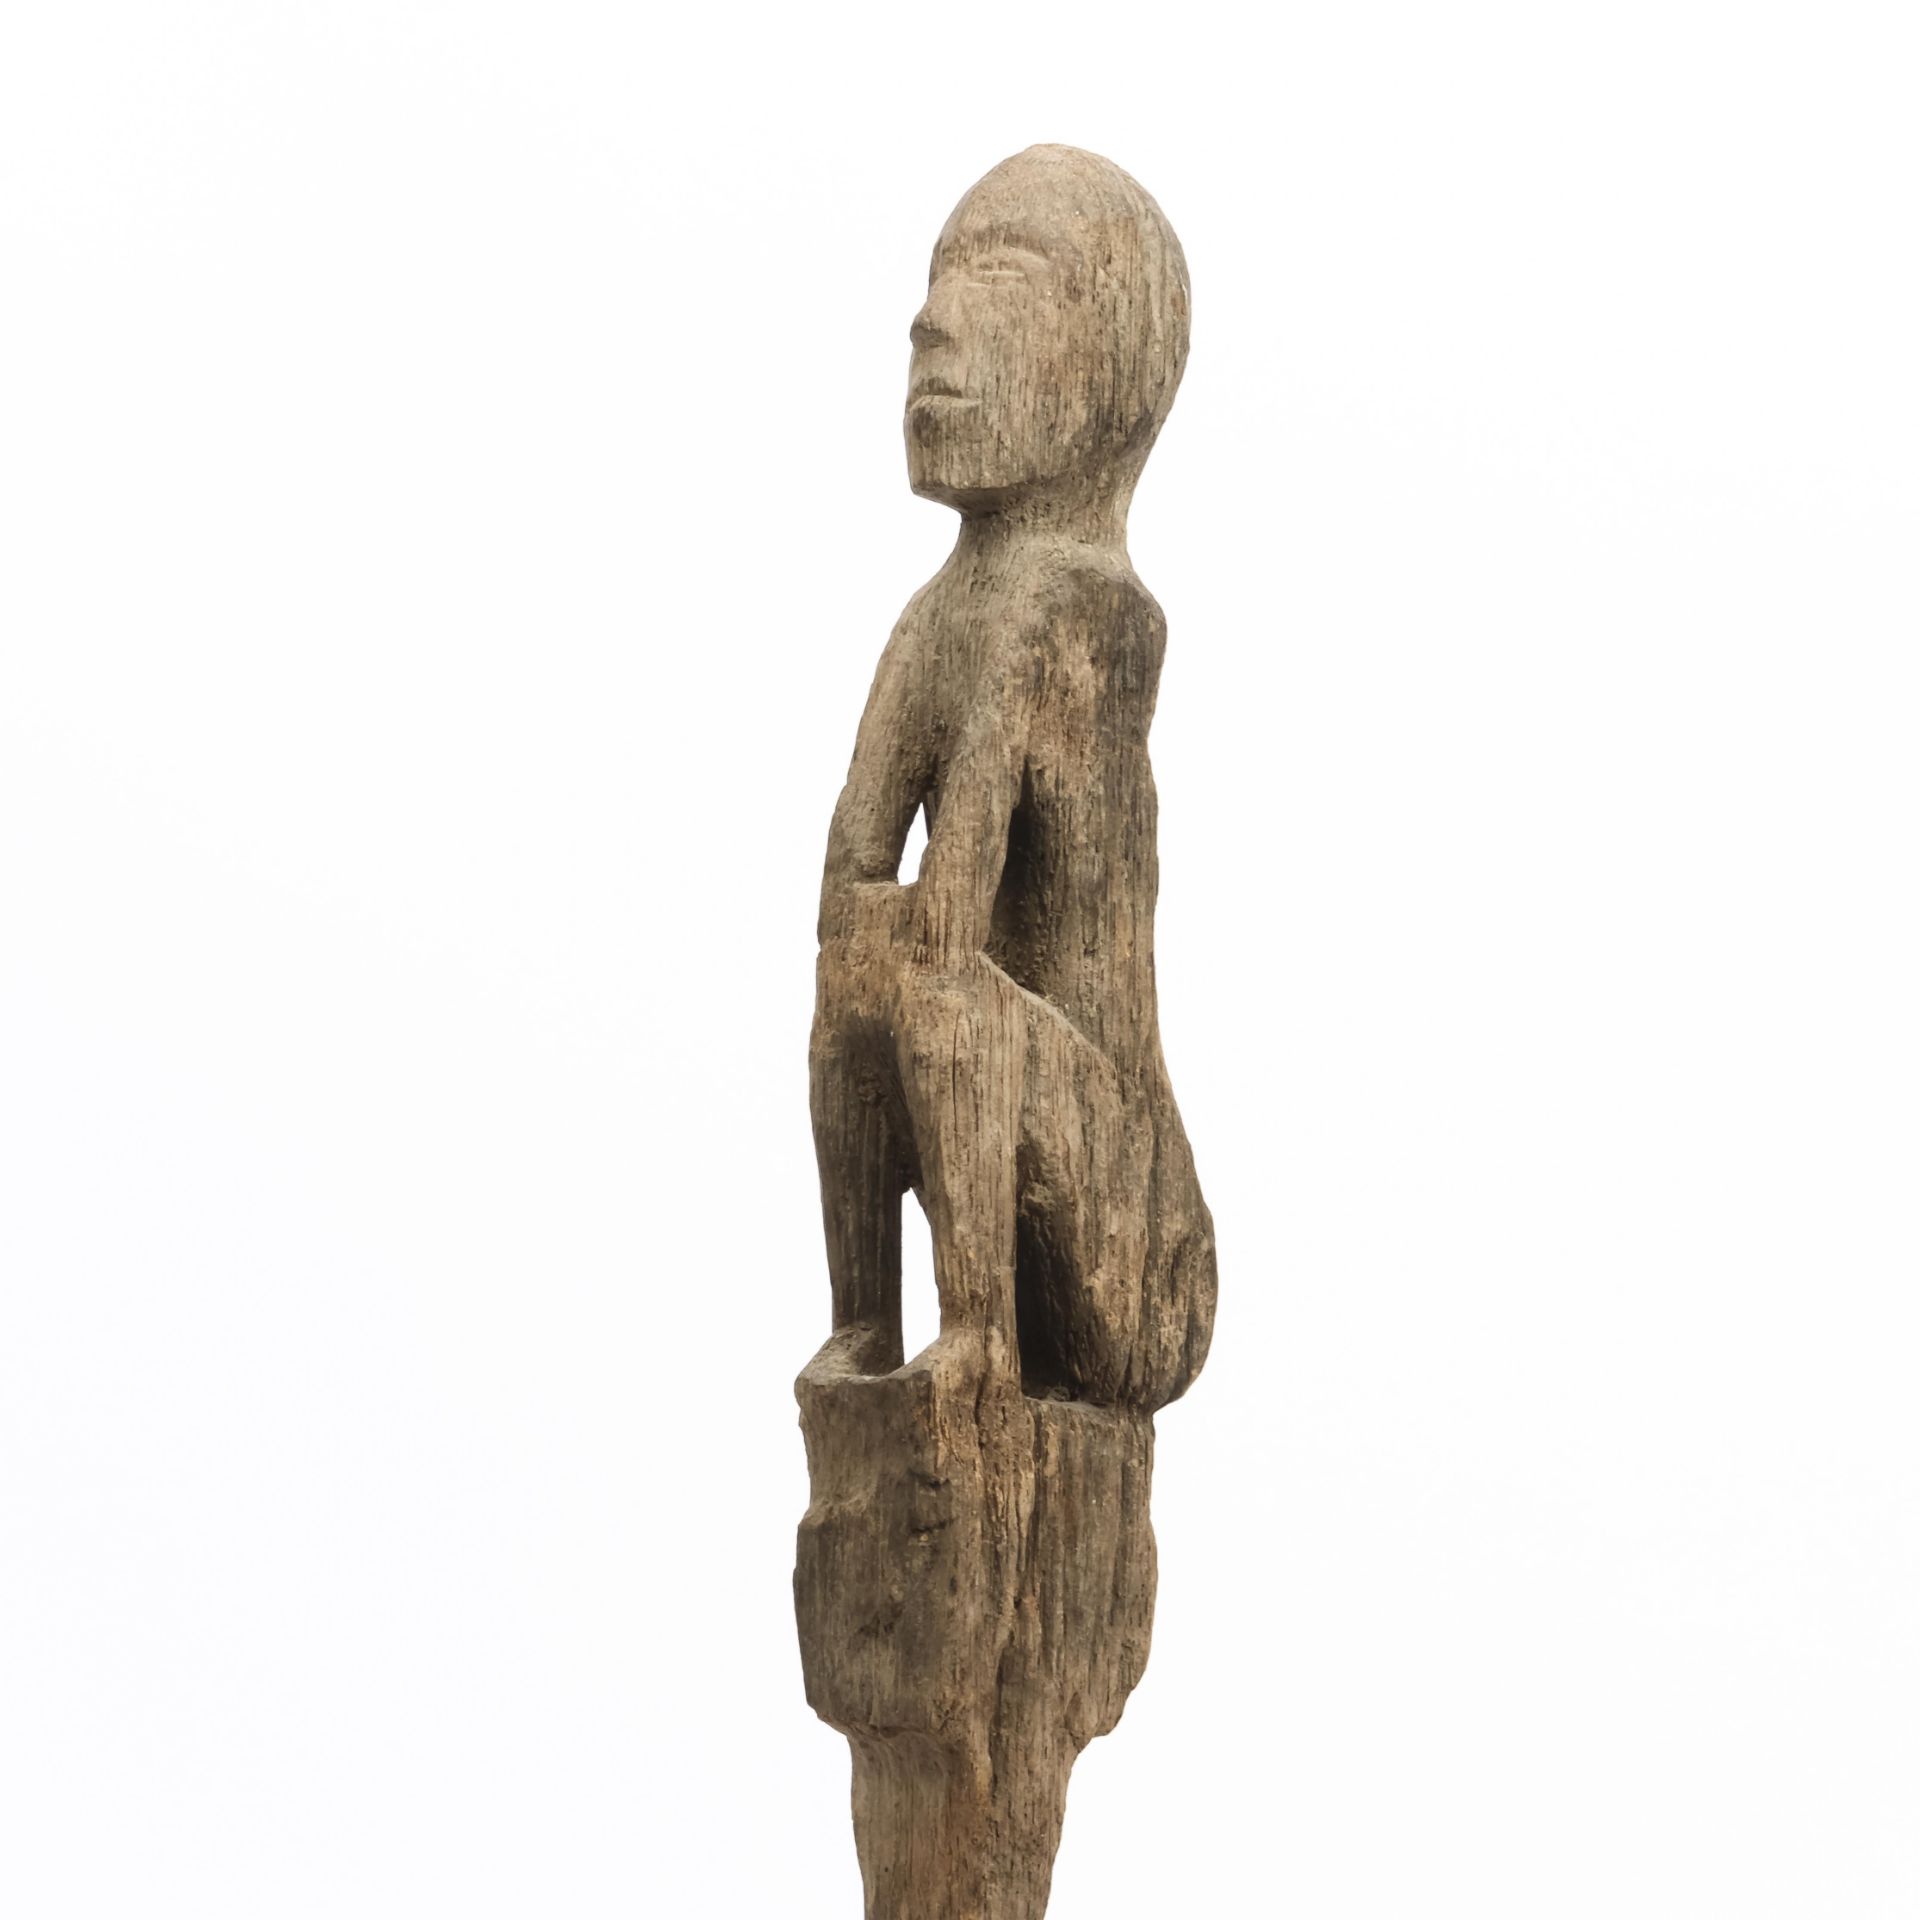 Borneo, Dayak, a wooden rice protector, squatting figure on top of a pole. - Image 2 of 3